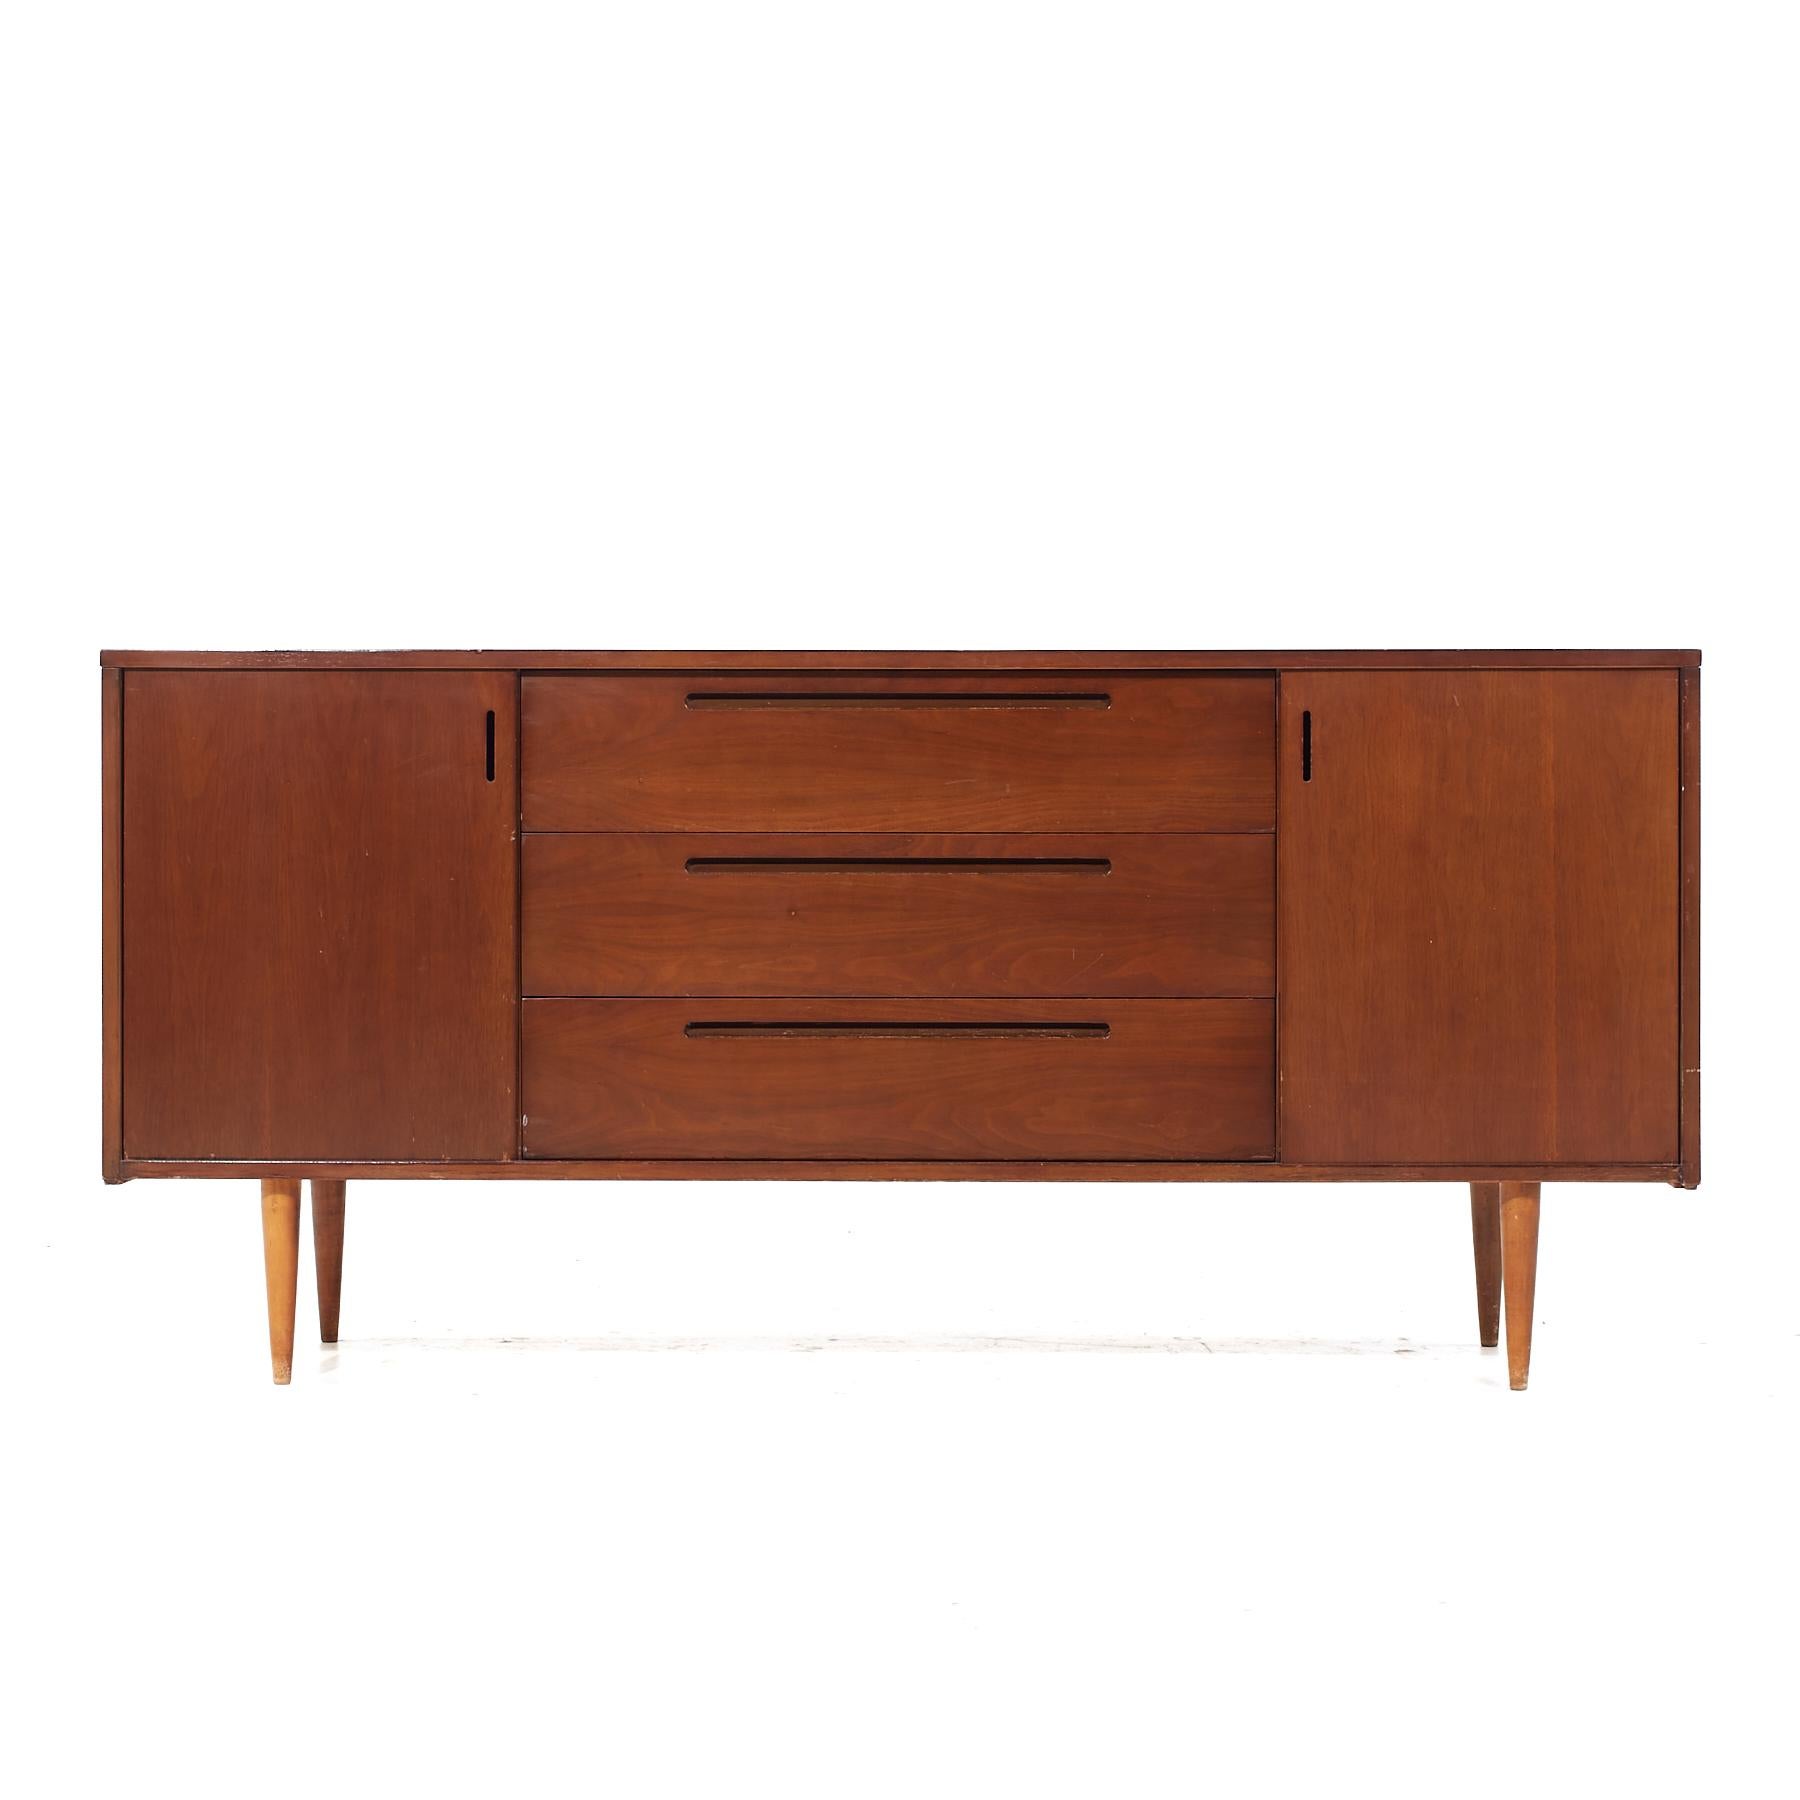 Founders Style Mid Century Walnut Credenza

This credenza measures: 67.75 wide x 17 deep x 31.5 inches high

All pieces of furniture can be had in what we call restored vintage condition. That means the piece is restored upon purchase so it’s free